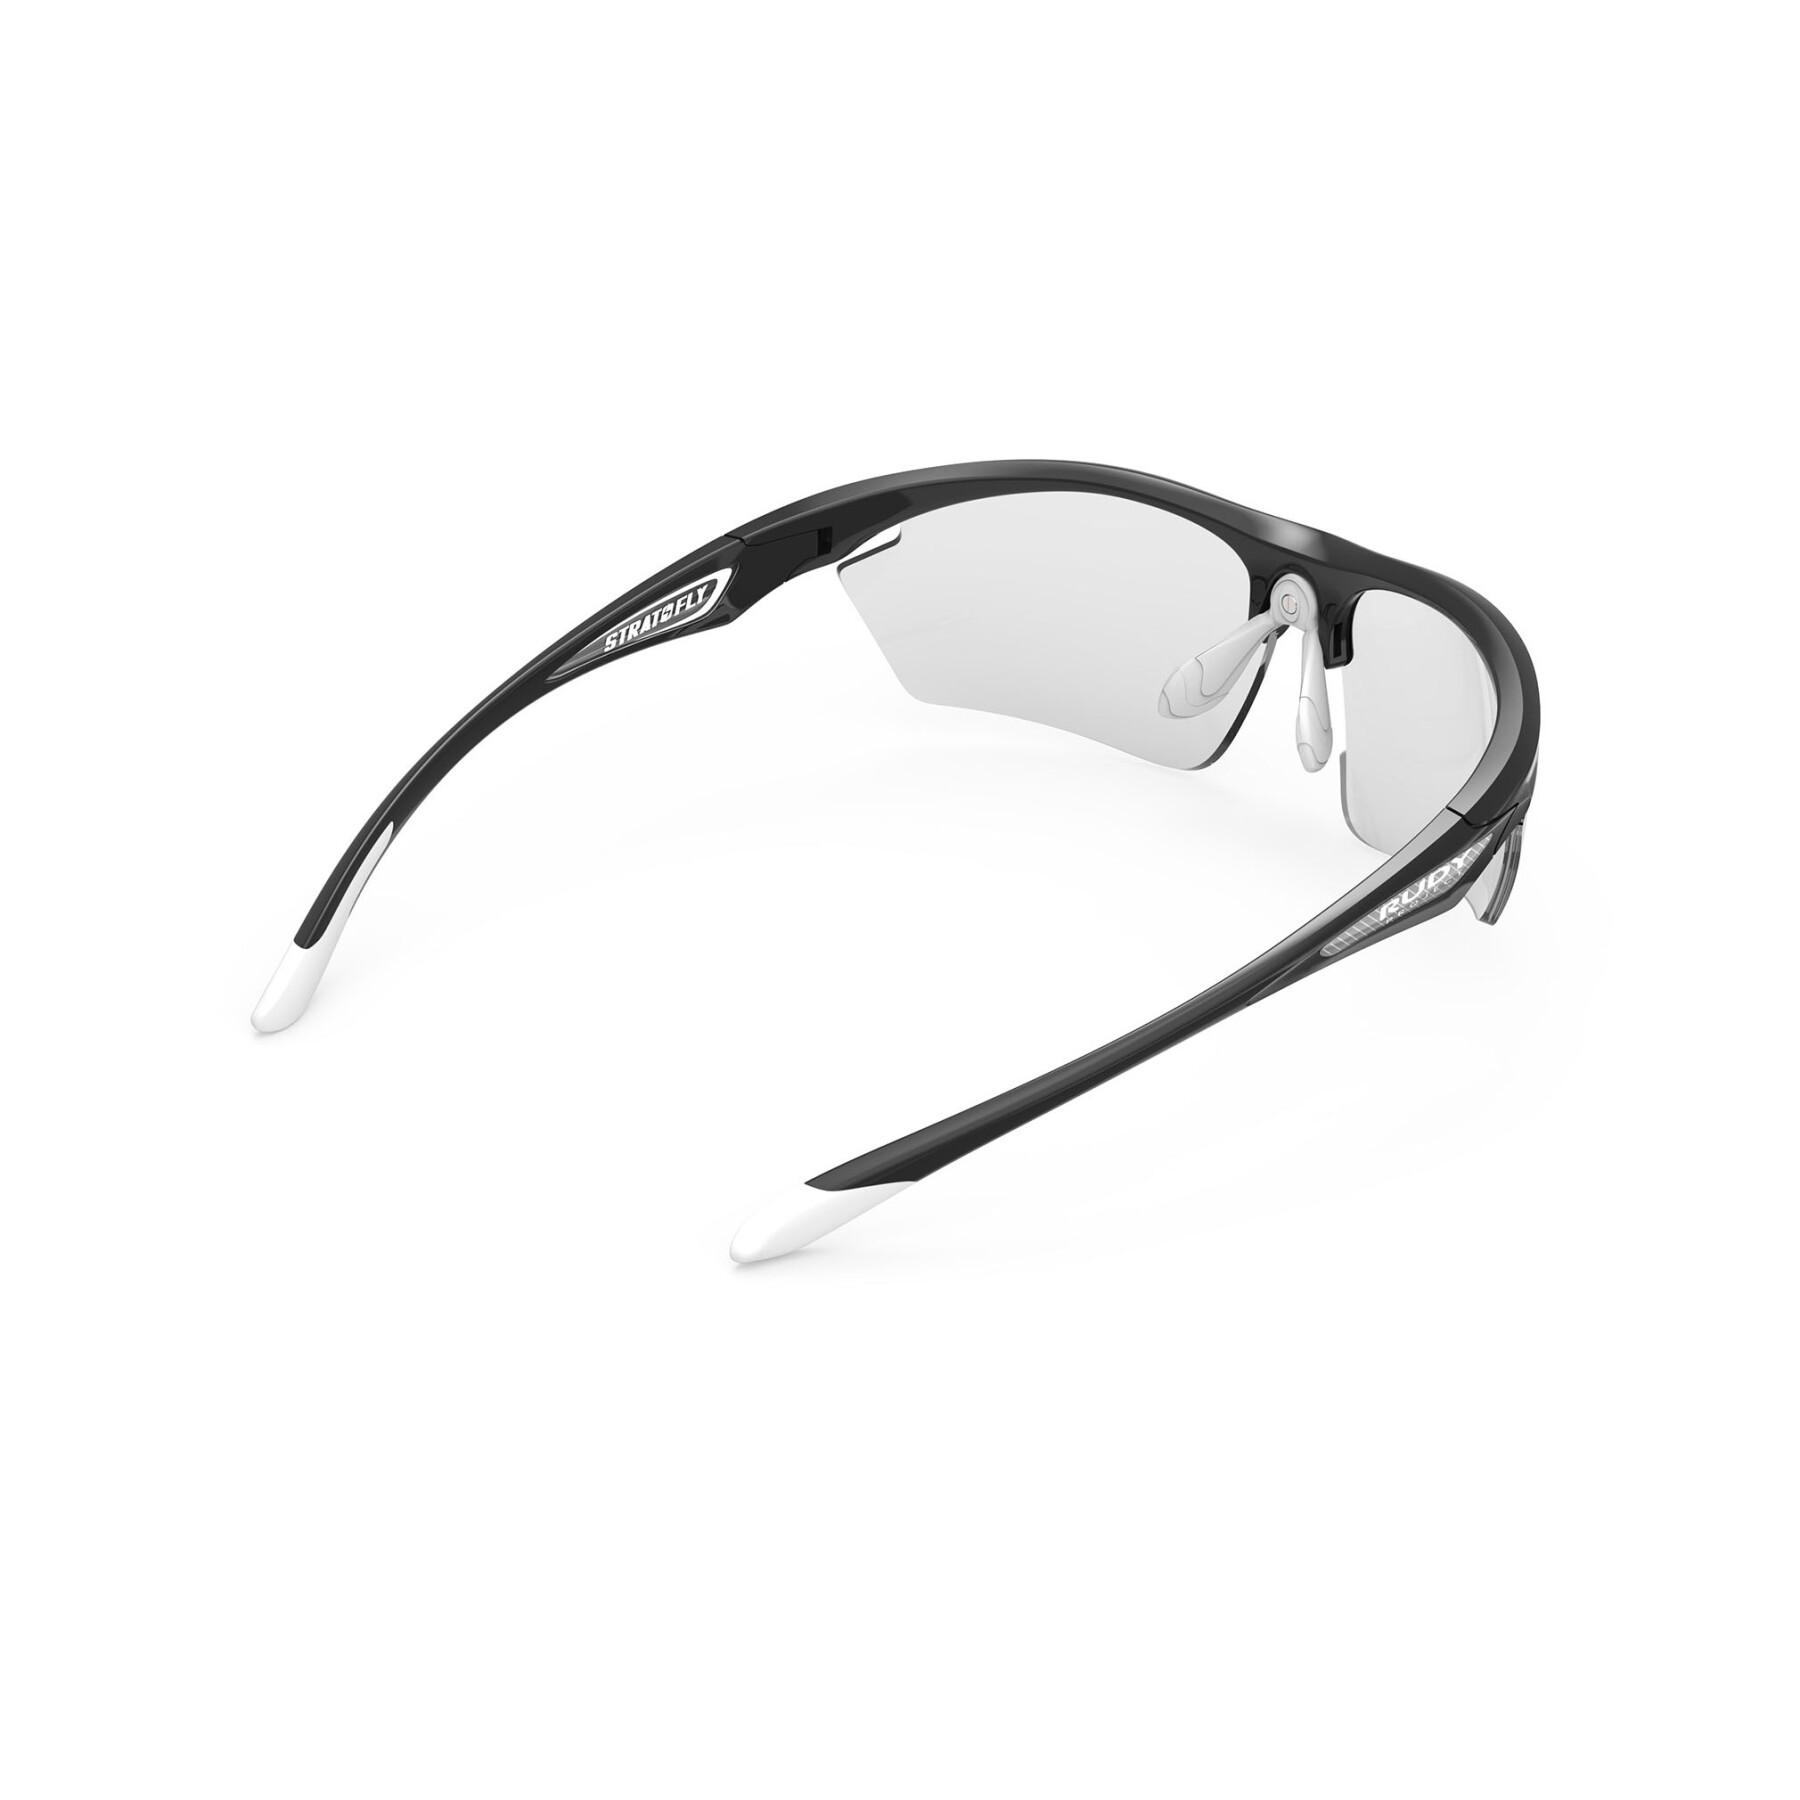 Performance glasses Rudy Project stratofly